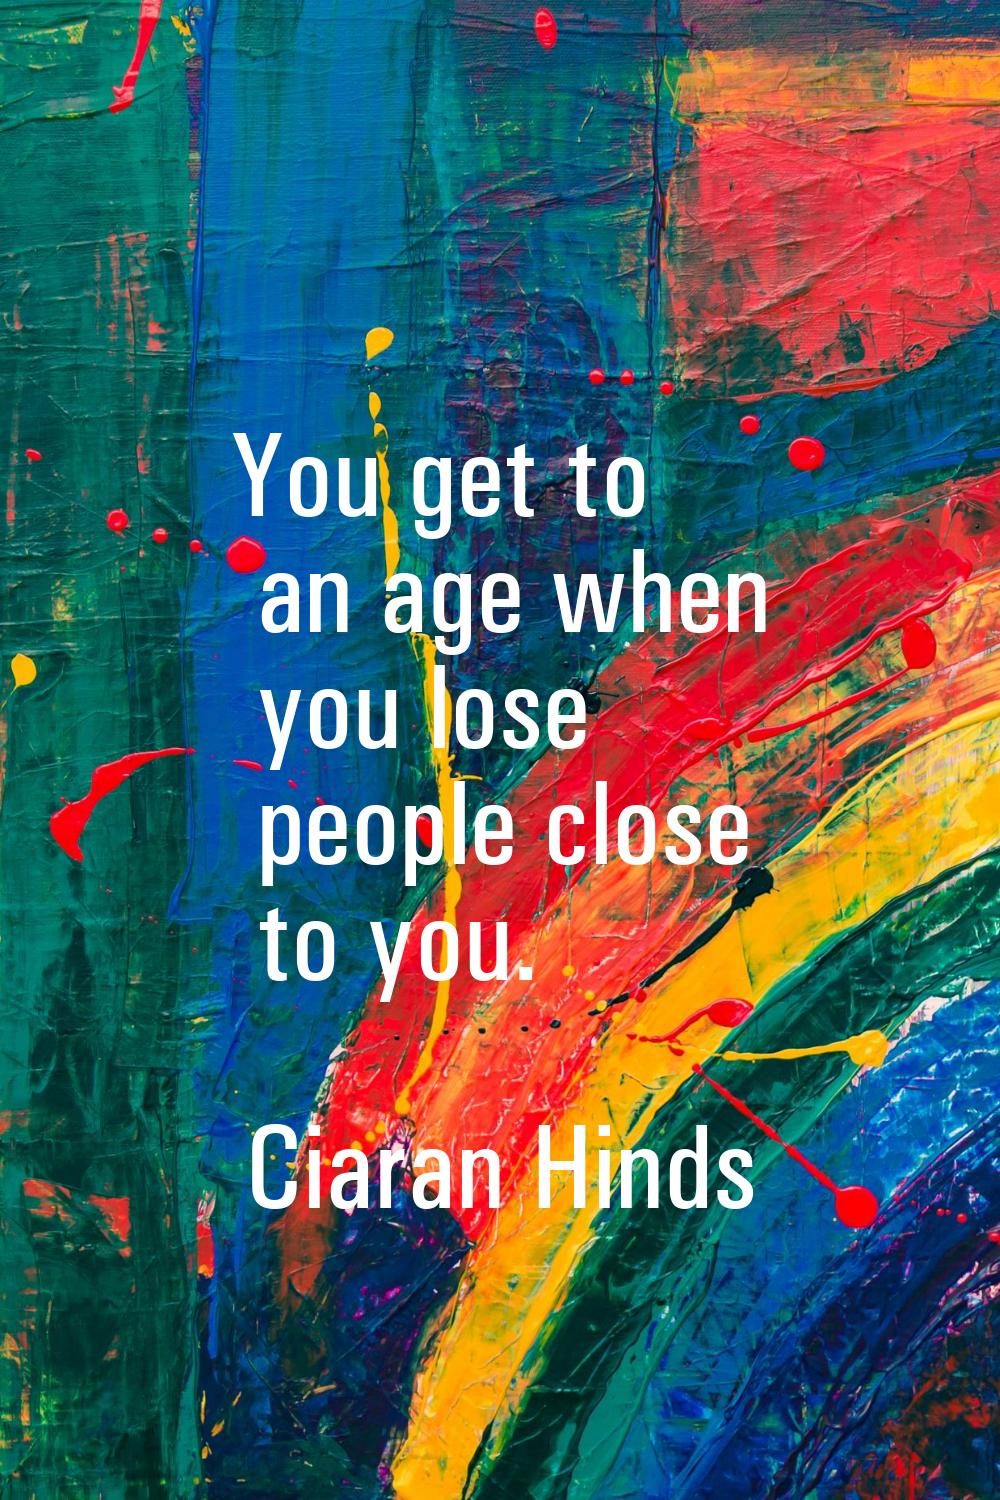 You get to an age when you lose people close to you.